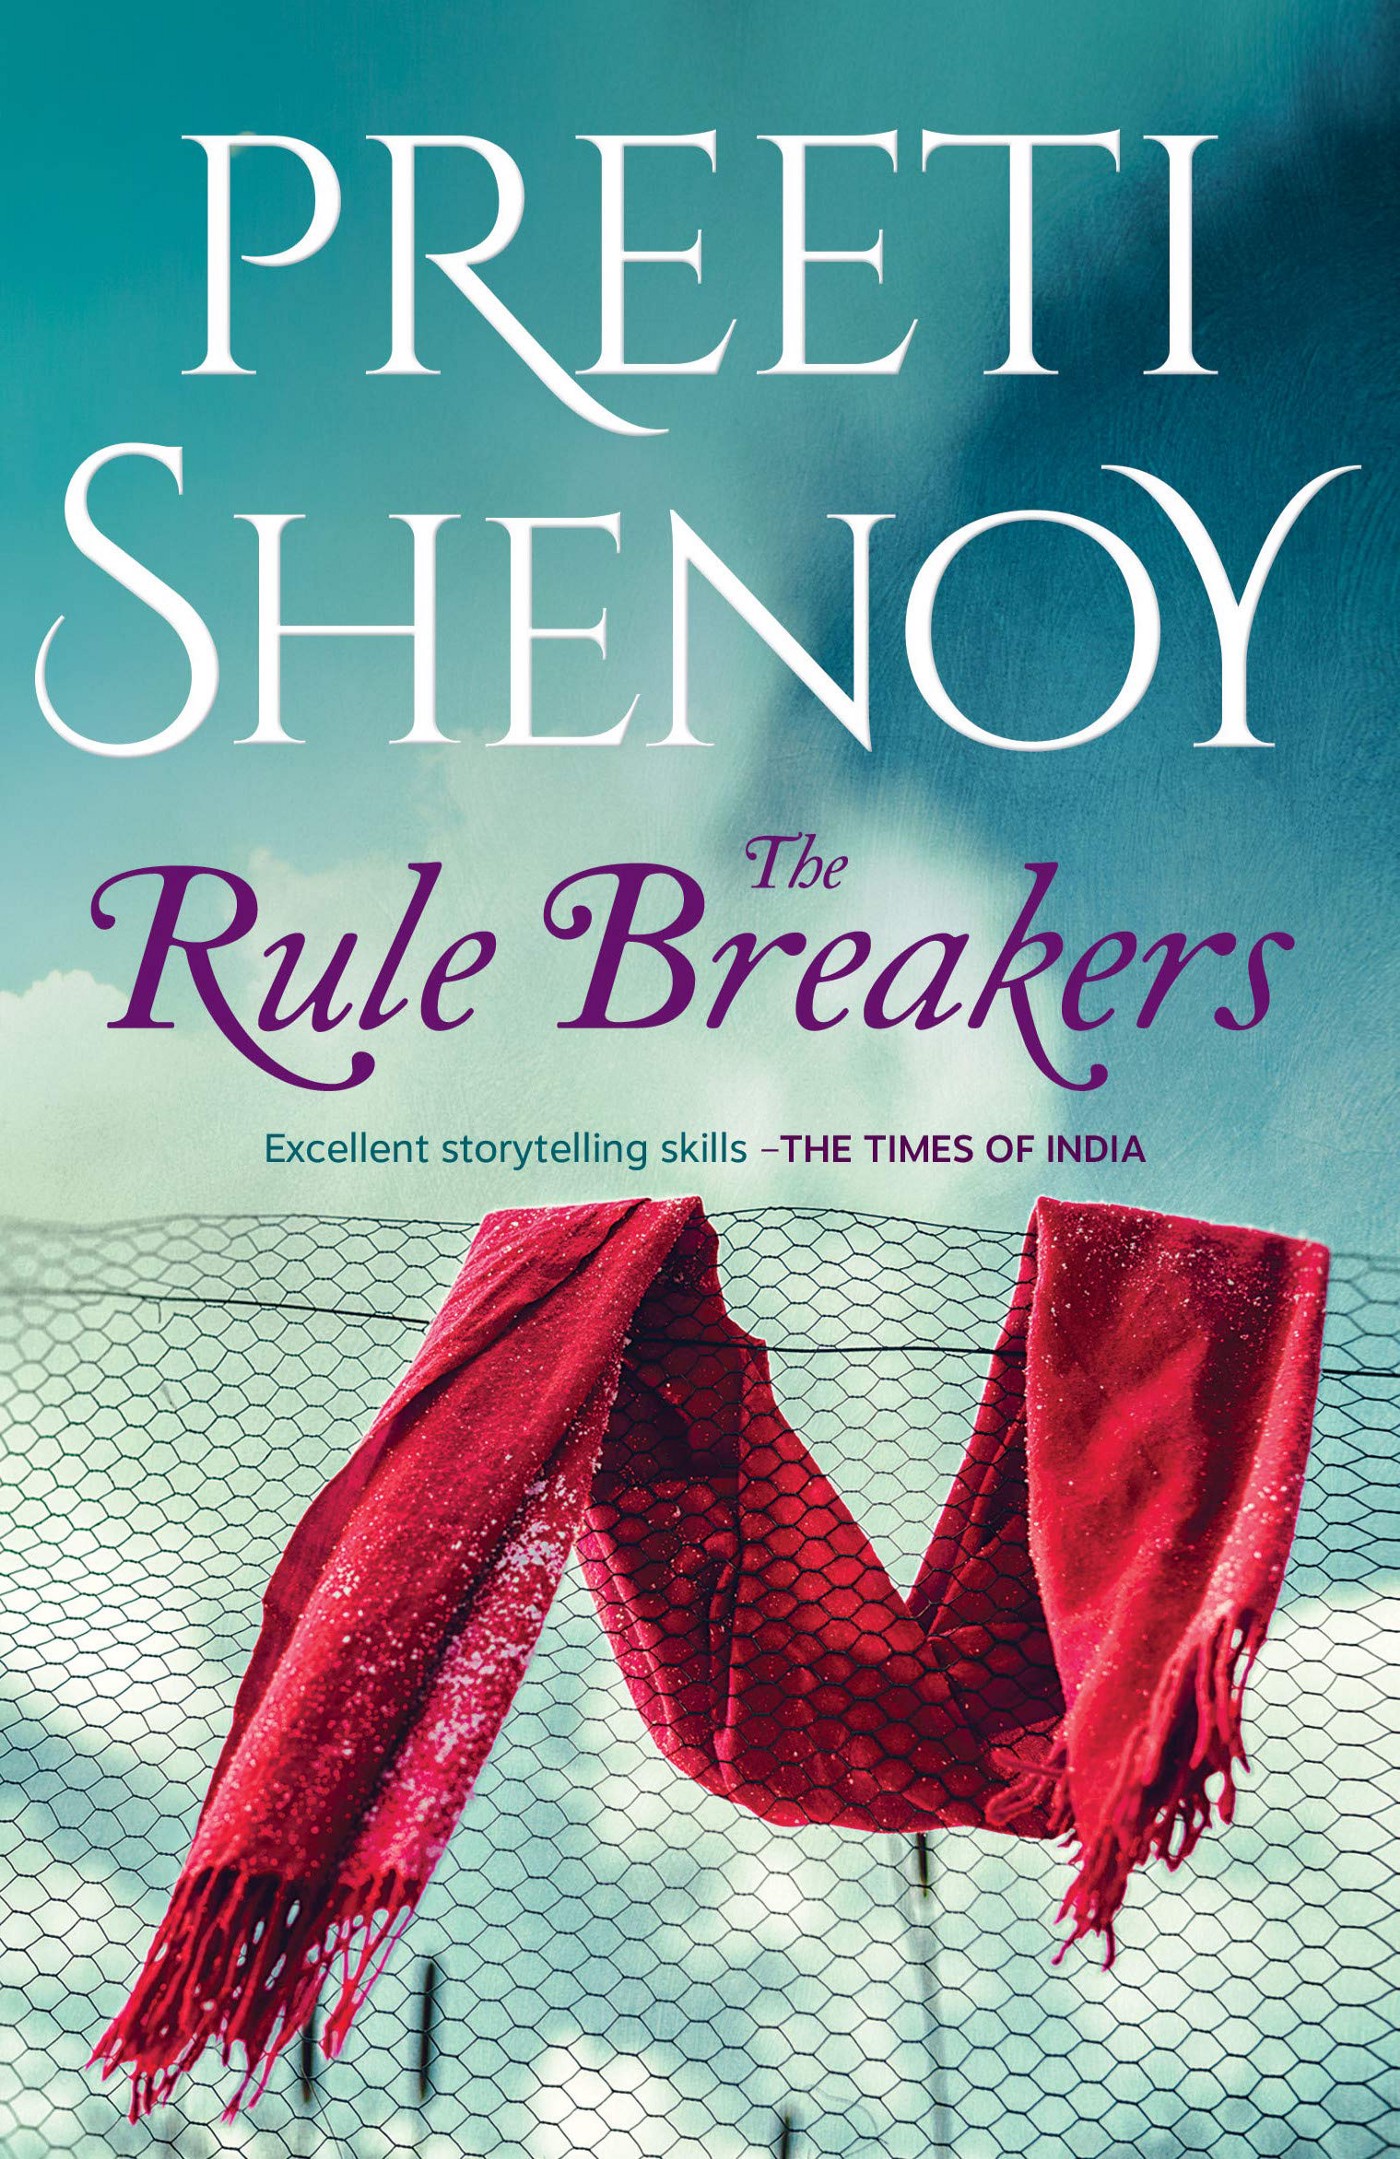 Book Review : The Rule Breakers by Preeti Shenoy